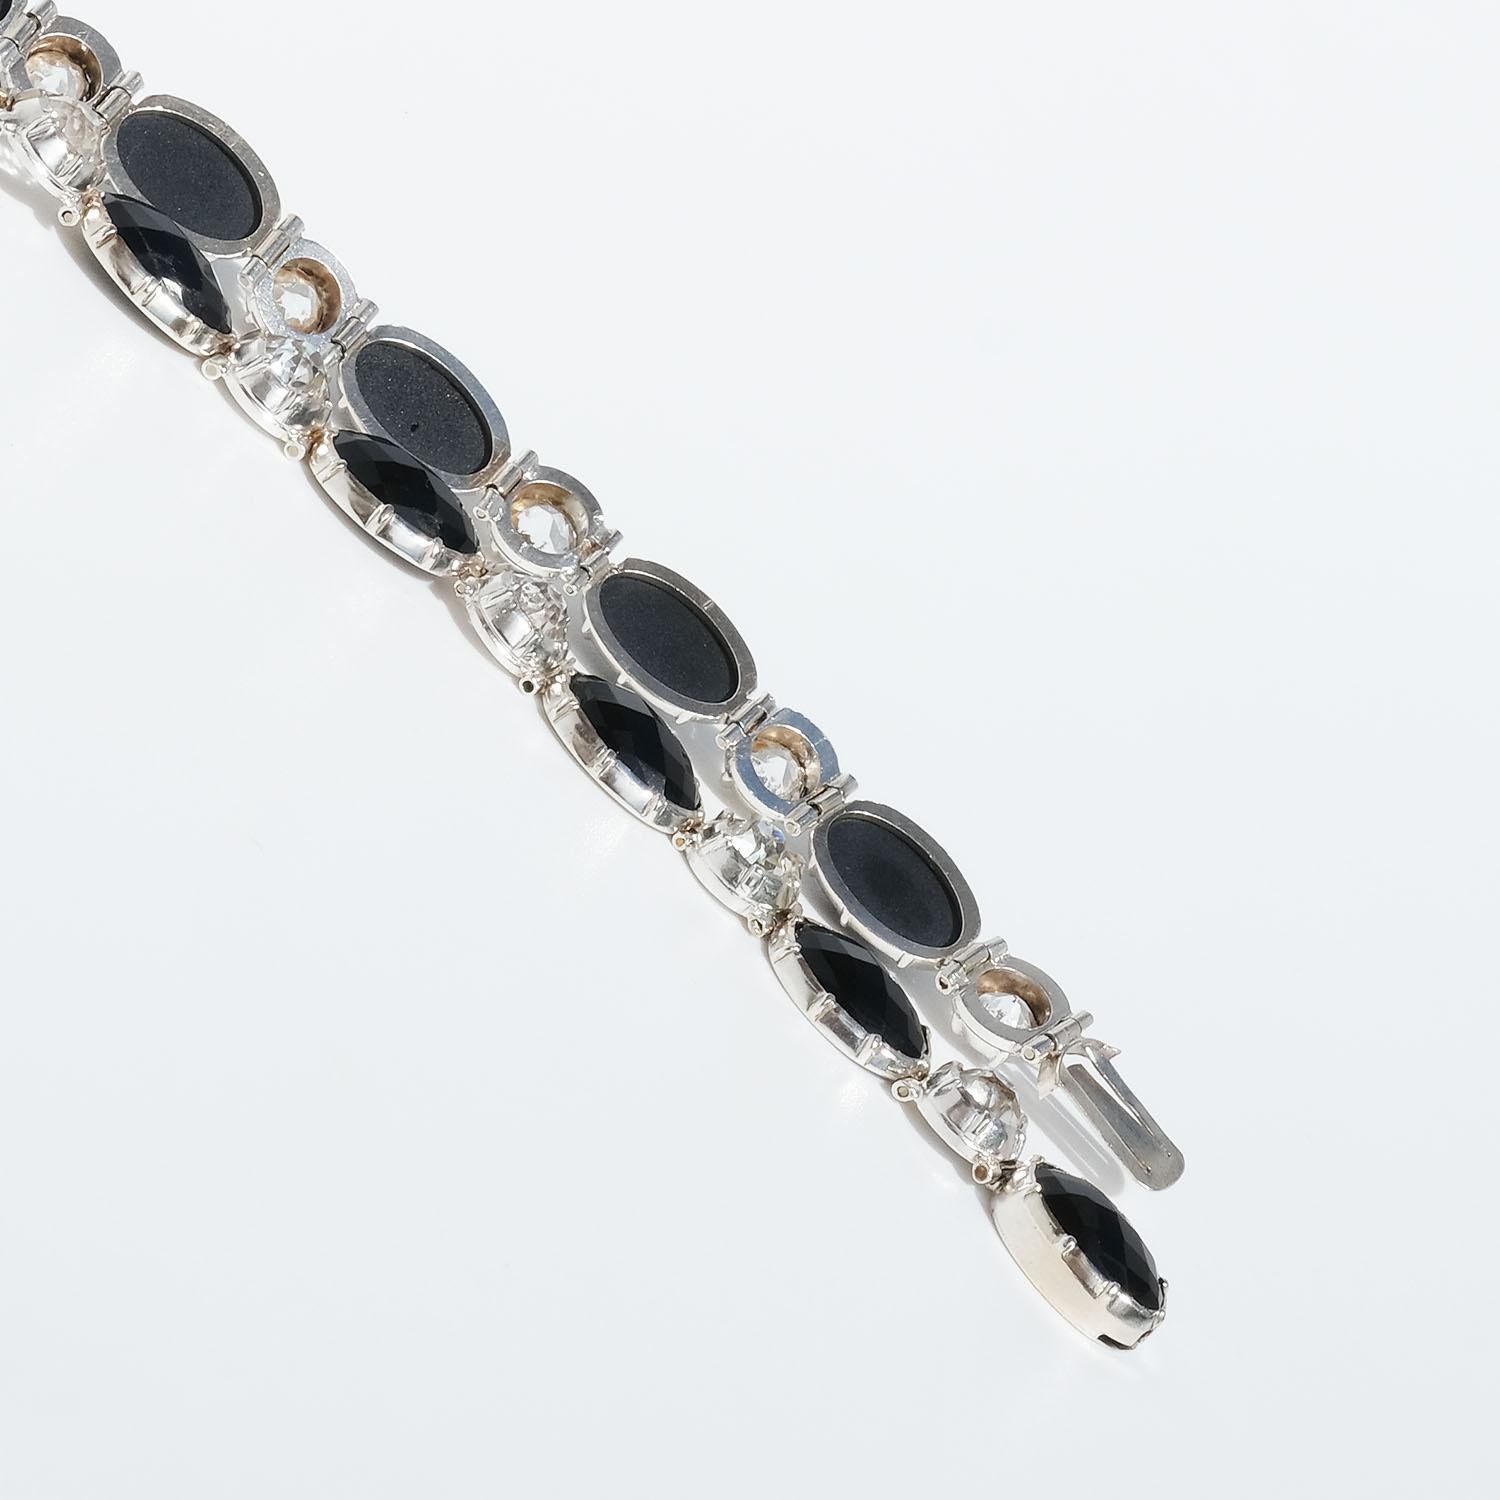 Oval Cut Antique Silver, Rock Crystal and Onyx Choker Necklace Made Year 1890 For Sale